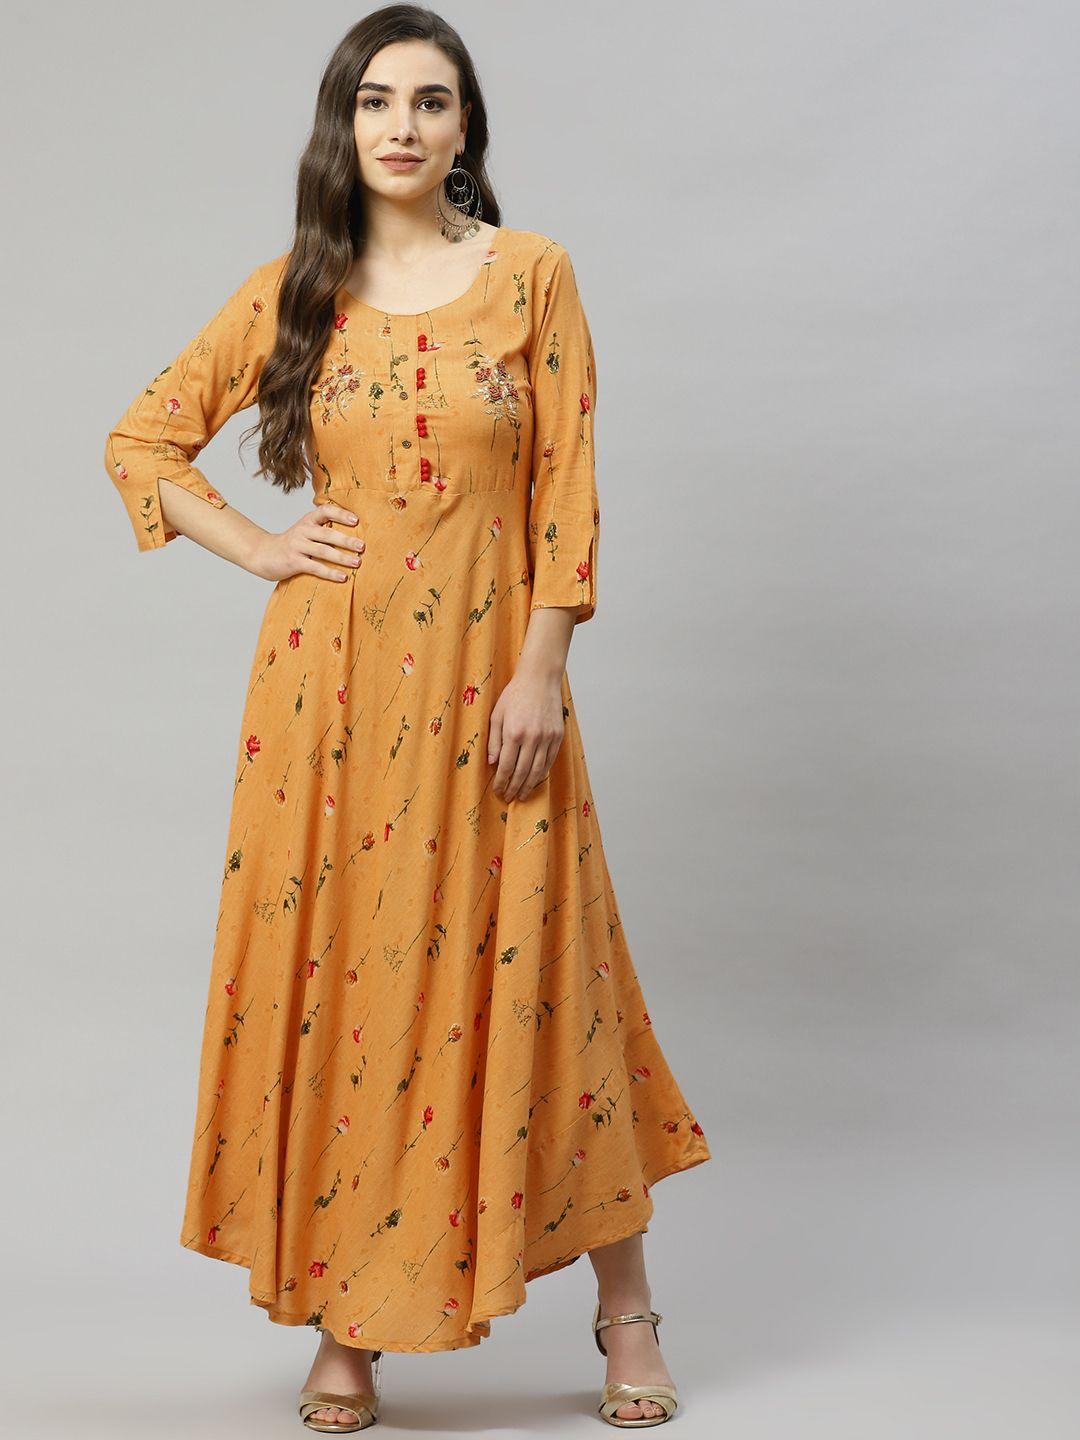 highlight fashion export mustard yellow floral a-line maxi dress